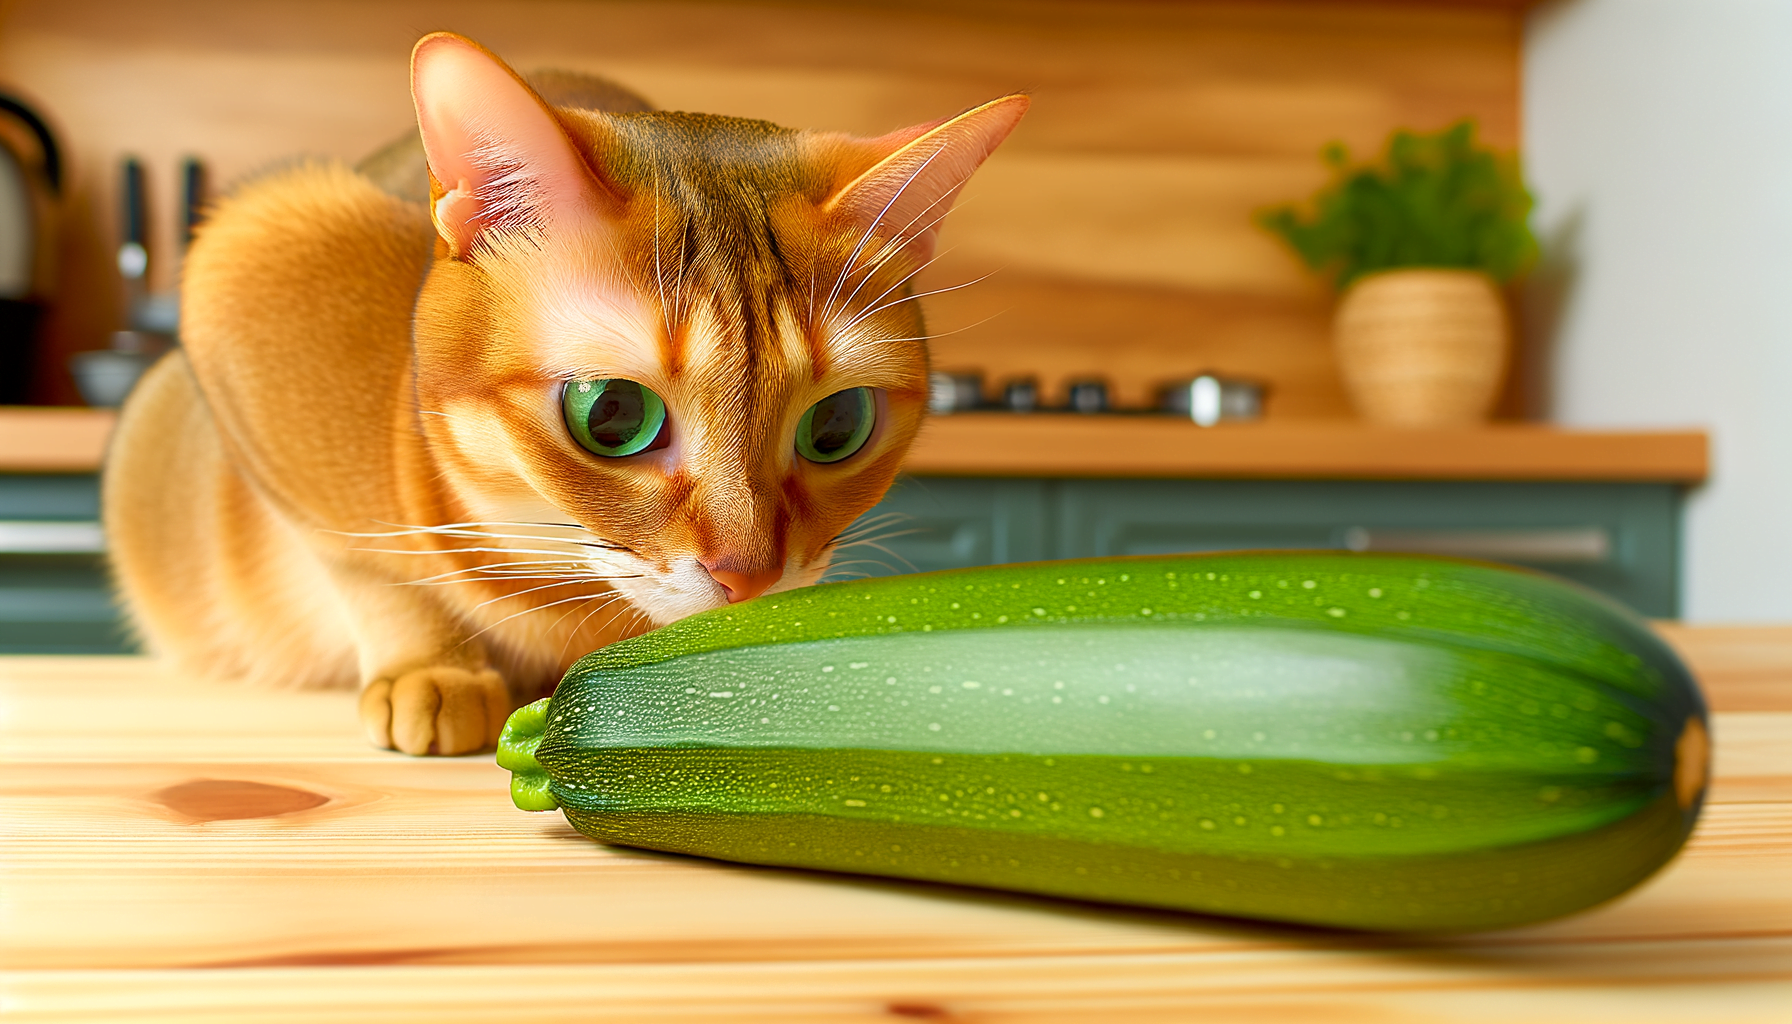 "Deciphering Feline Diets: Can Cats Safely Munch on Zucchini?"